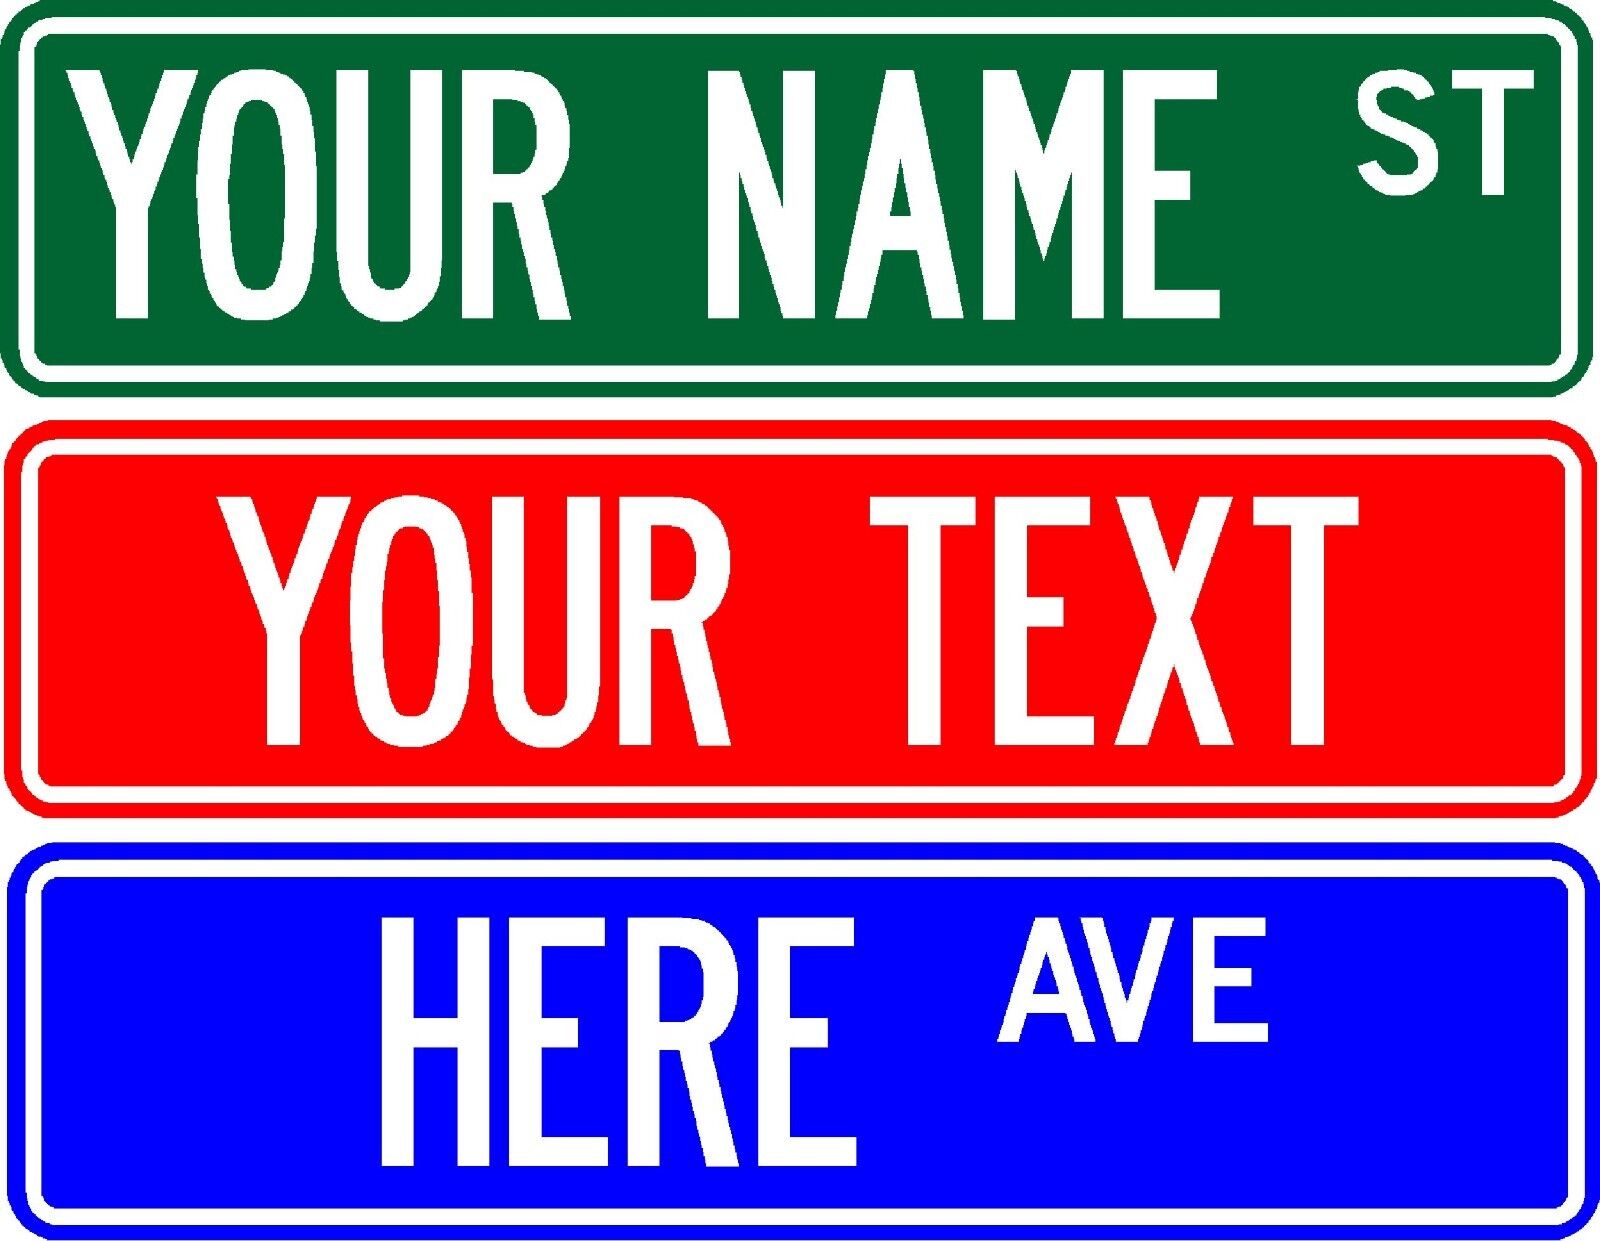 PERSONALIZED CUSTOM STREET SIGN, 6